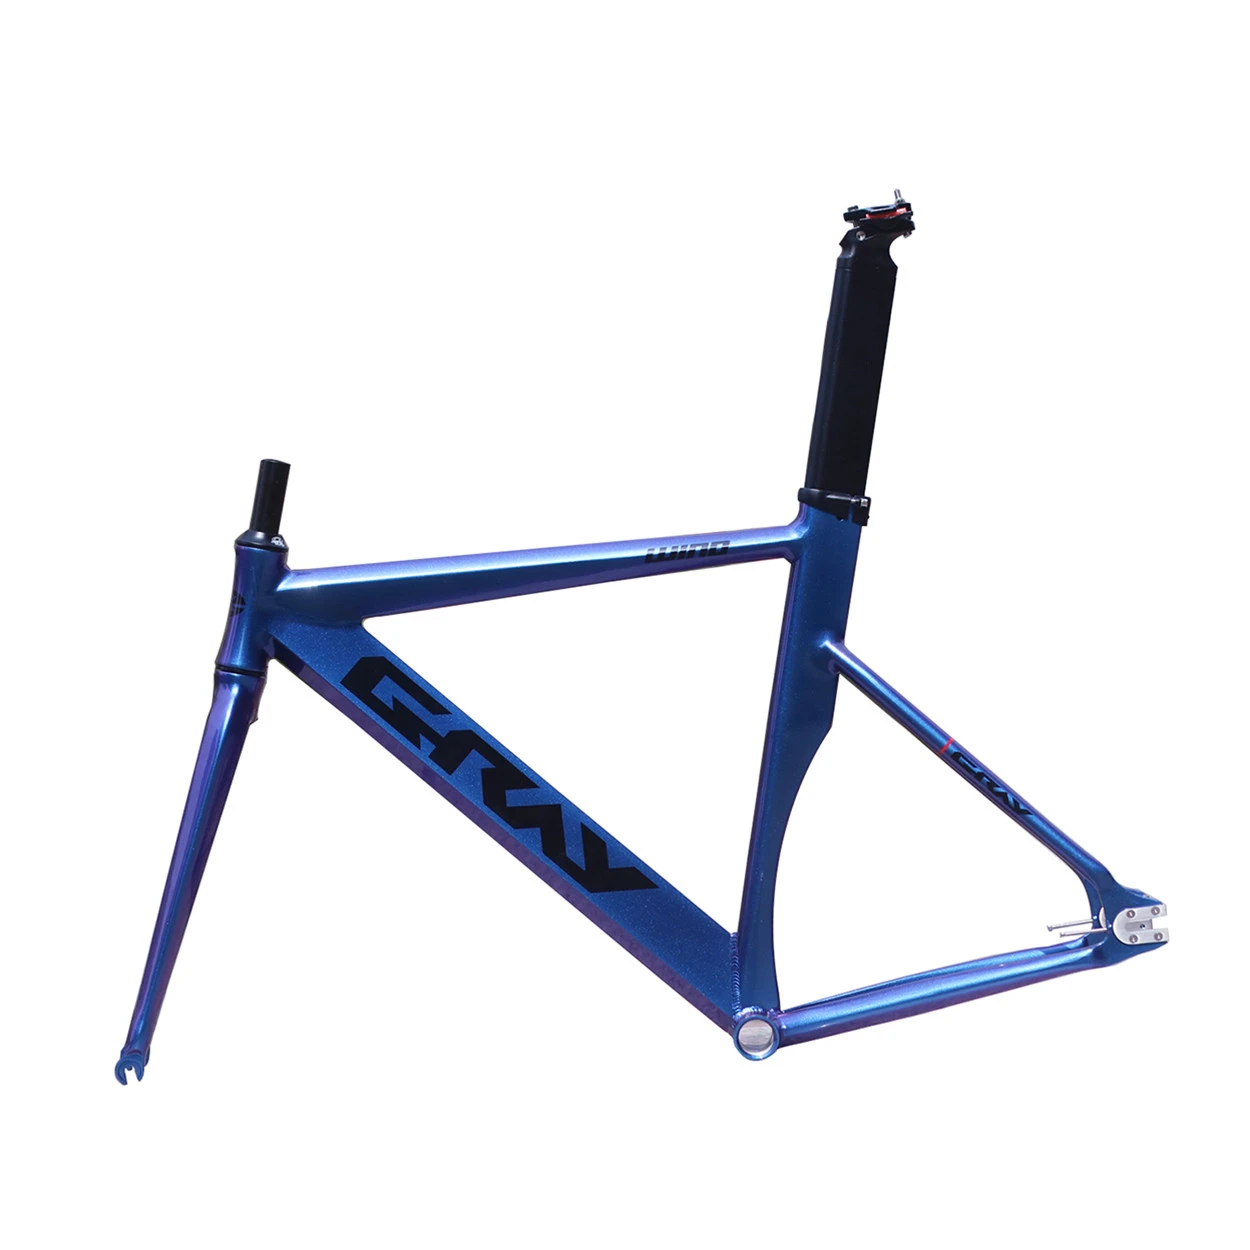 Fixie Bike 48cm 52cm 56cm Frame Single Speed Bike Muscle Frame With Carbon Fiber Fork  Aluminum Alloy Track Bicycle